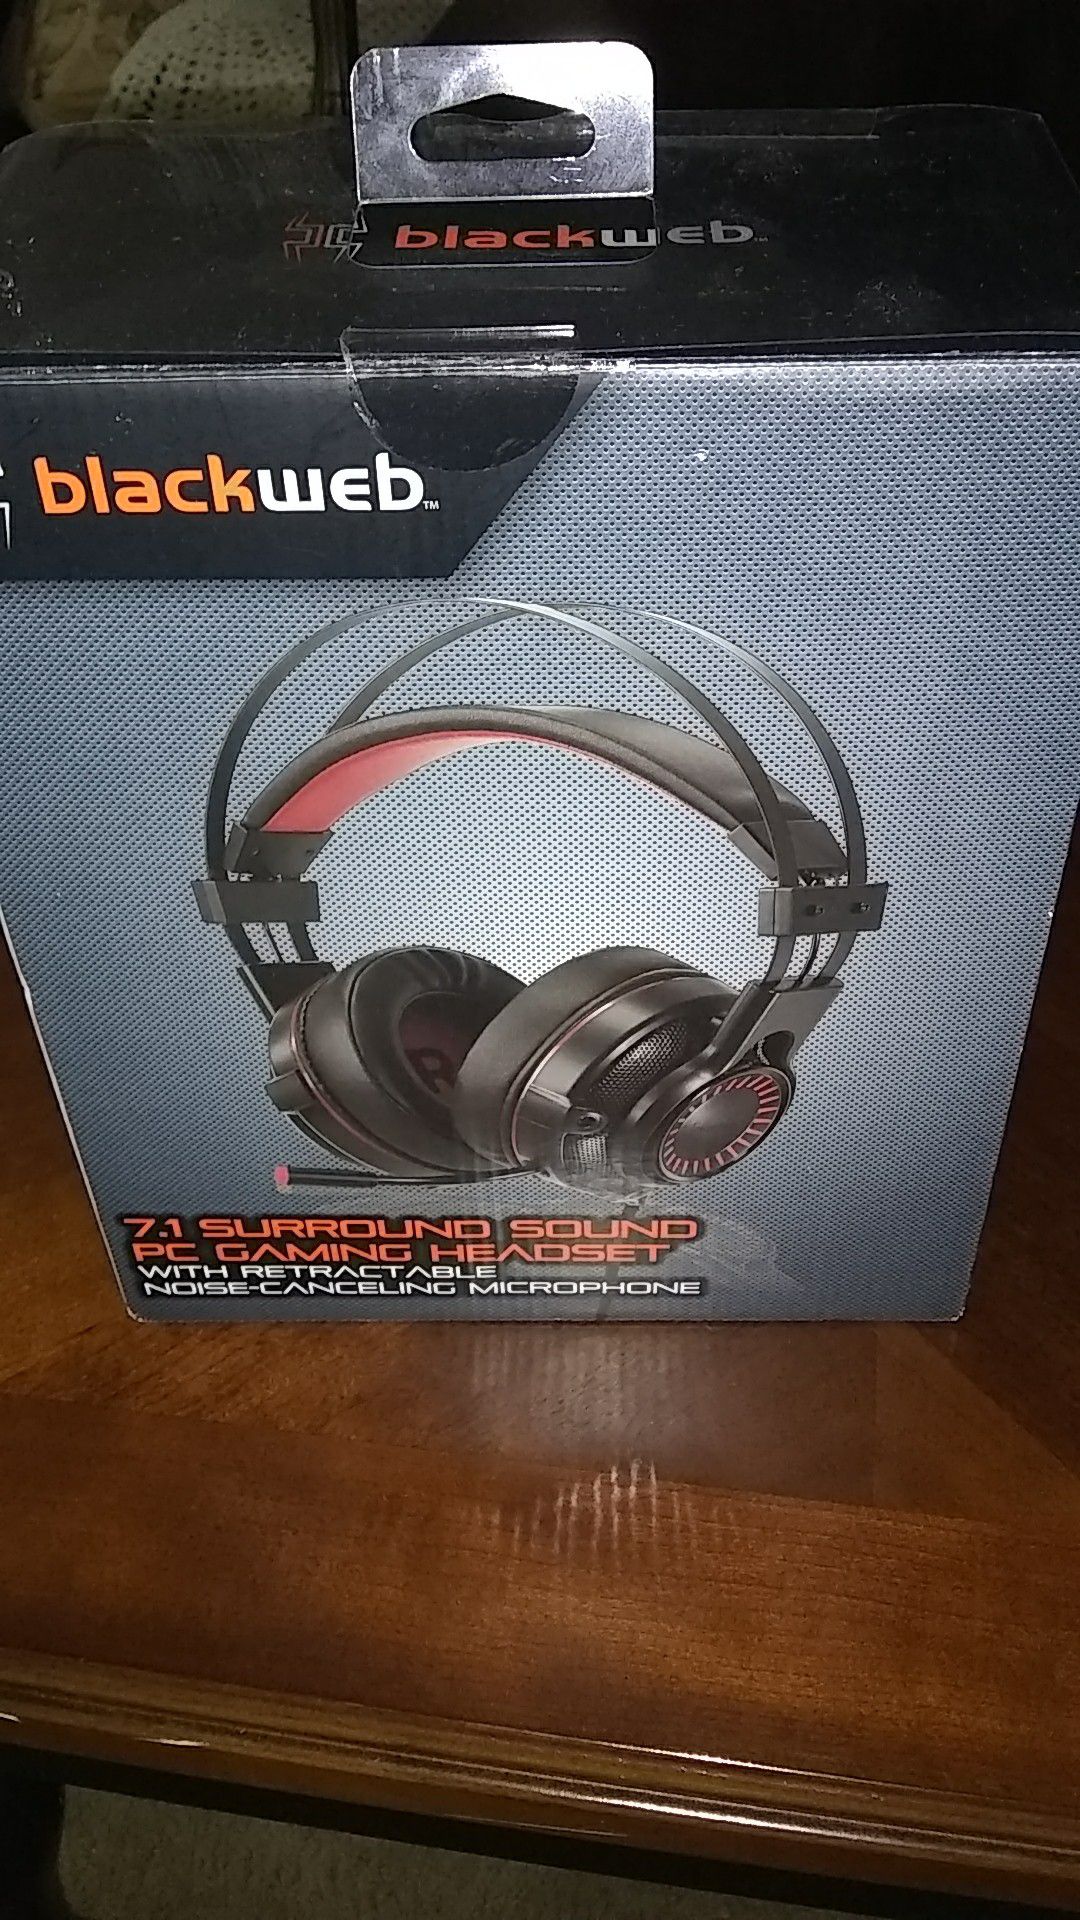 Eik nog een keer Schrijfmachine Blackweb 7.1 surround sound PC gaming set with noise canceling and  microphone for Sale in Chino, CA - OfferUp